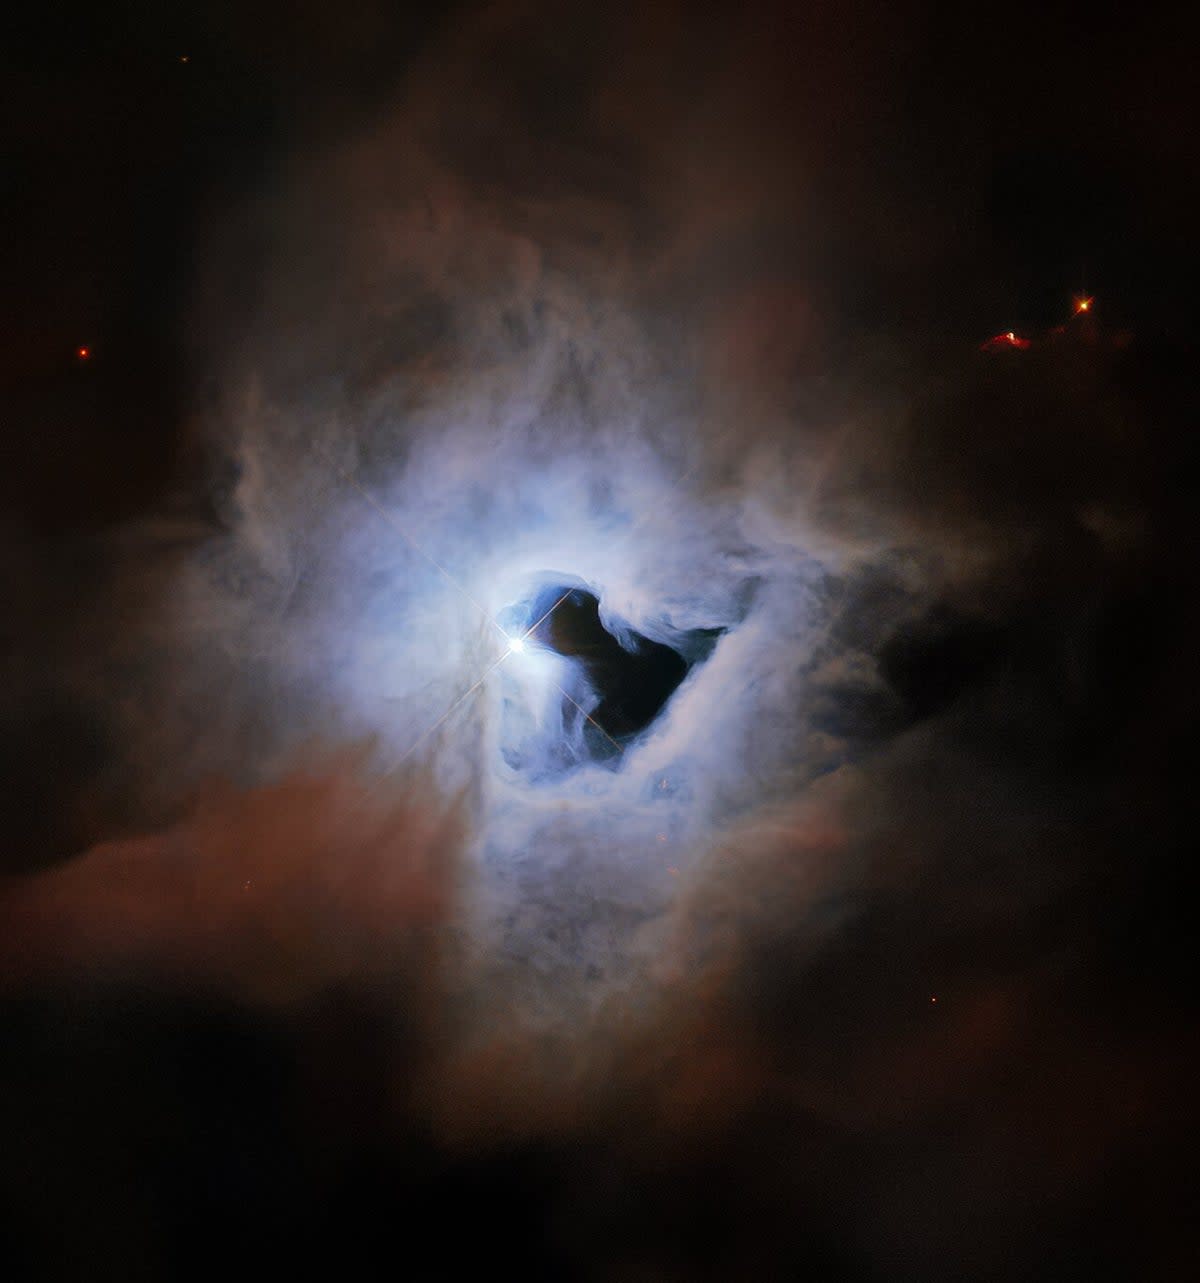 The reflection nebular NGC 1999 lies about 1,350 light years from Earth in the constellation Orion, and exhibits an inky black central “keyhole” in this image taken by the Hubble Space Telescope (ESA/Hubble & NASA, K. Noll)